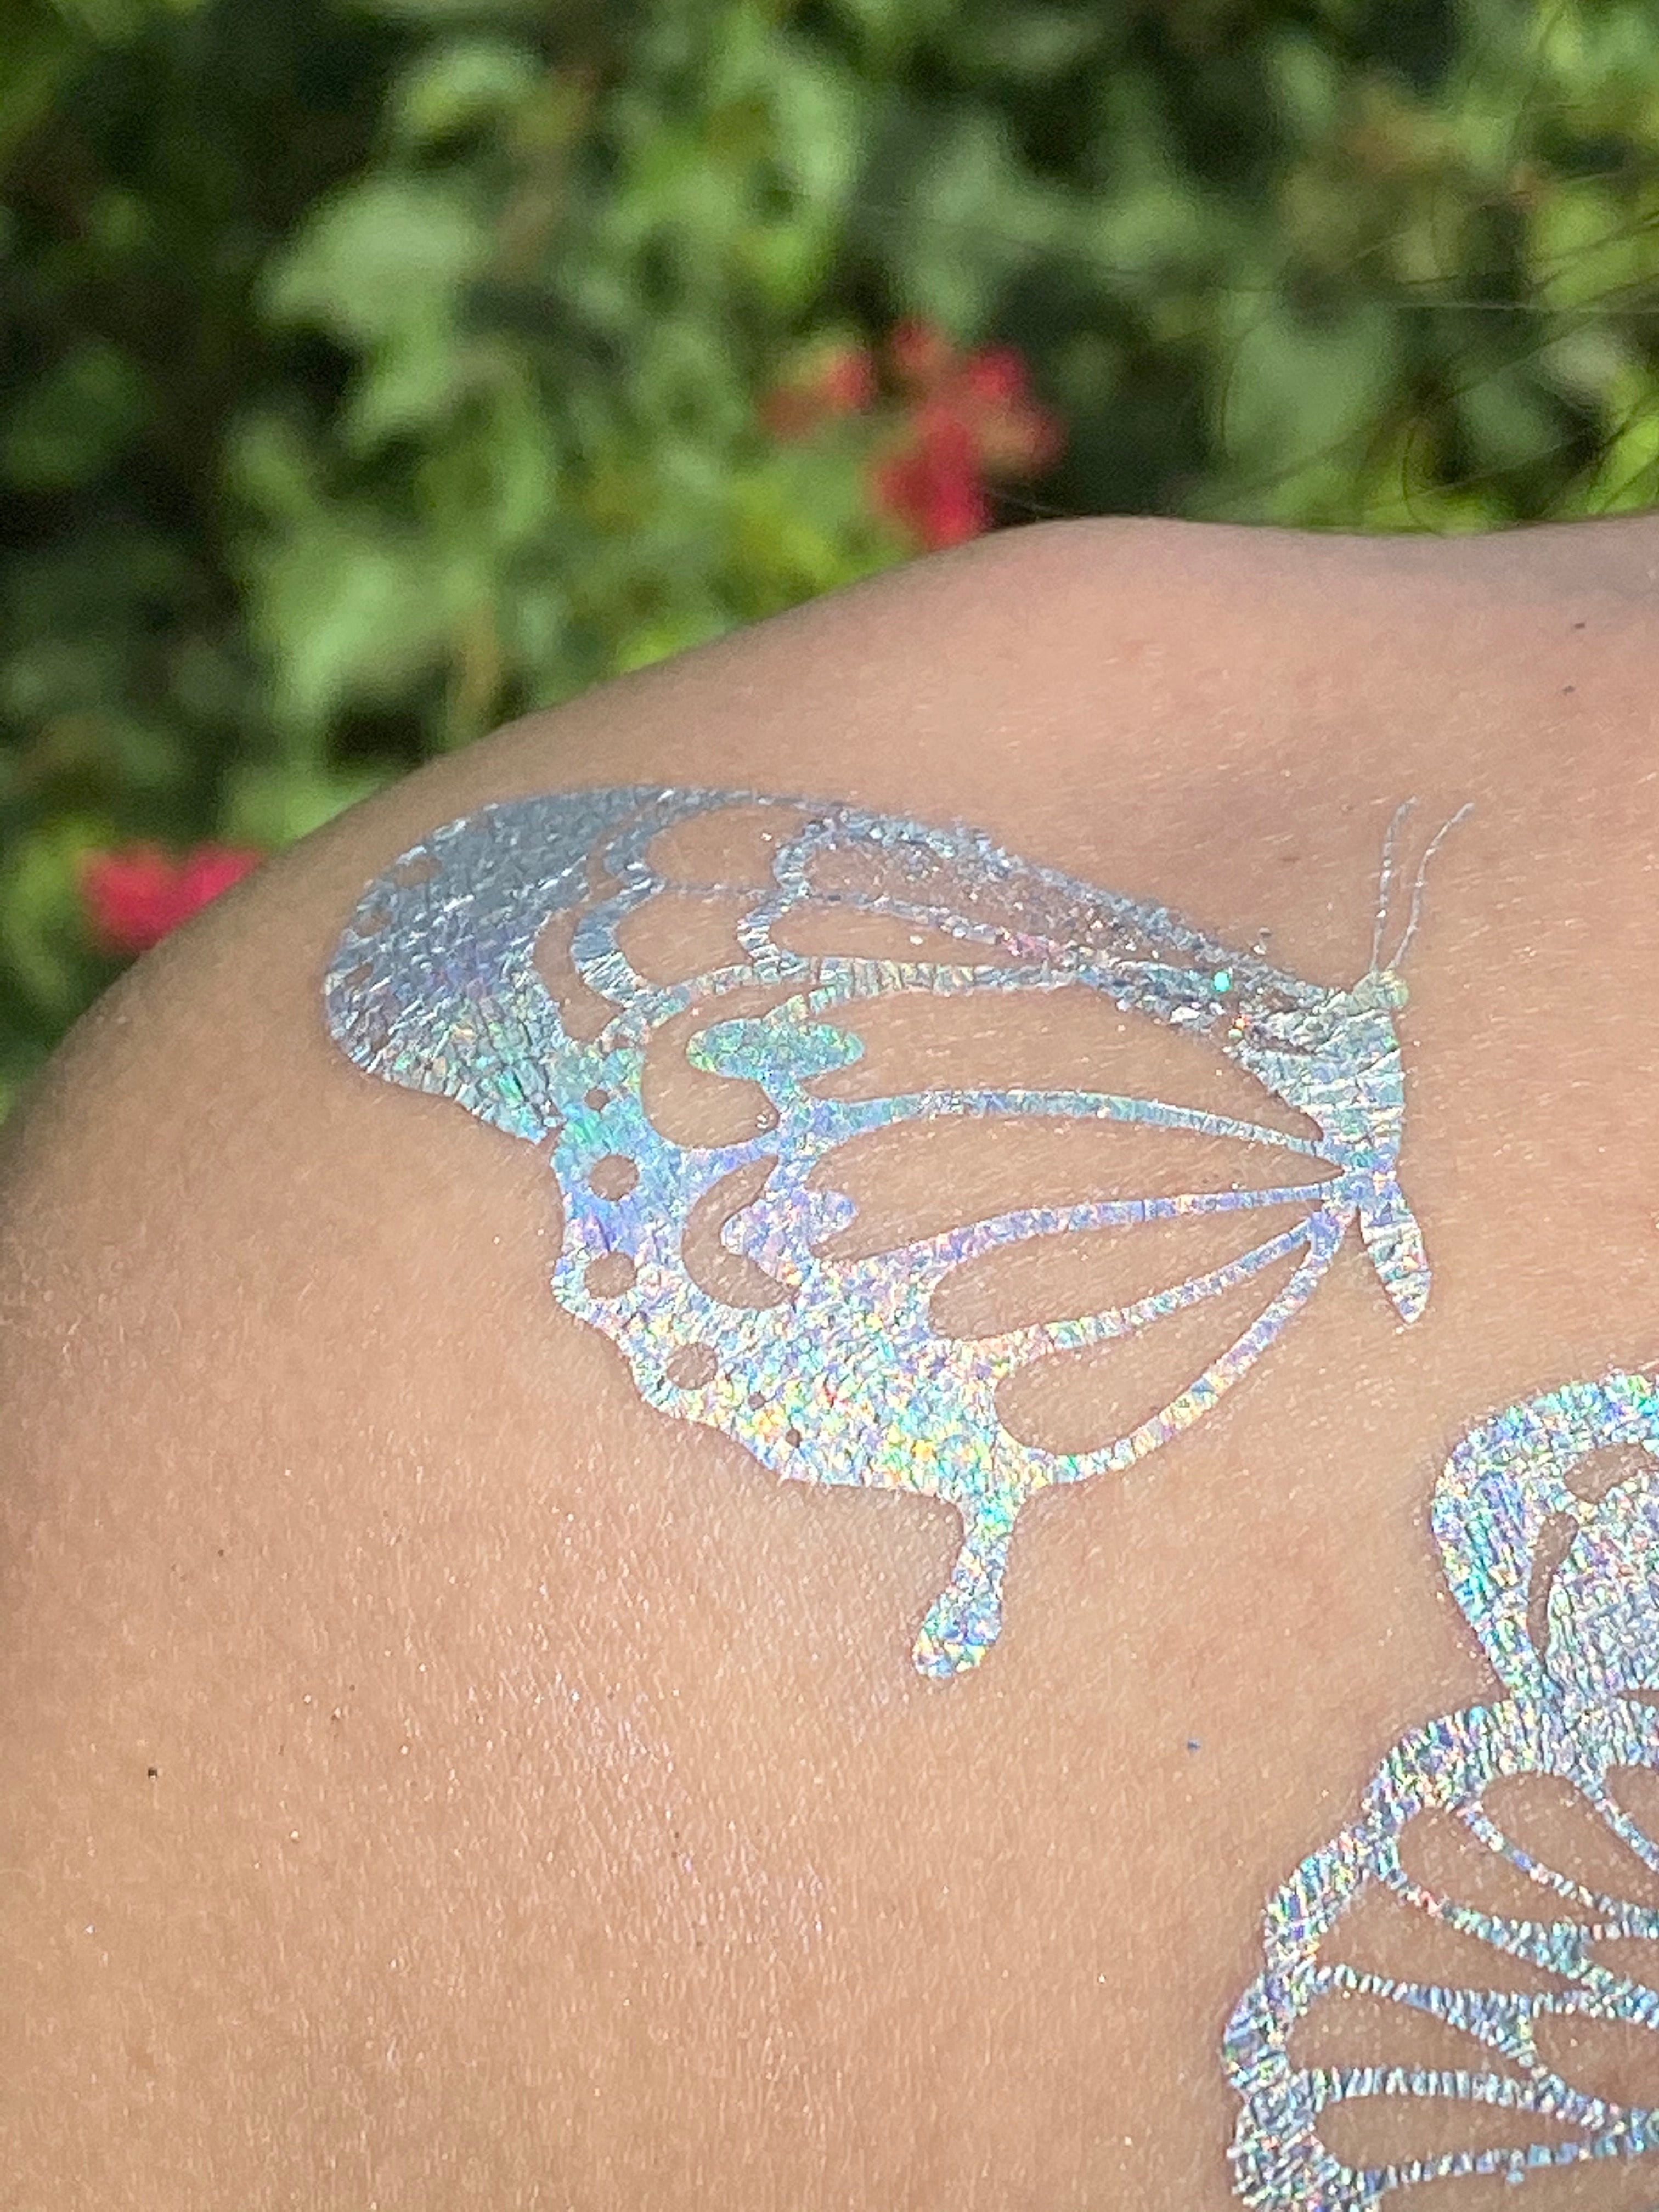 Holographic Temporary Tattoos as Advertising | Holomex